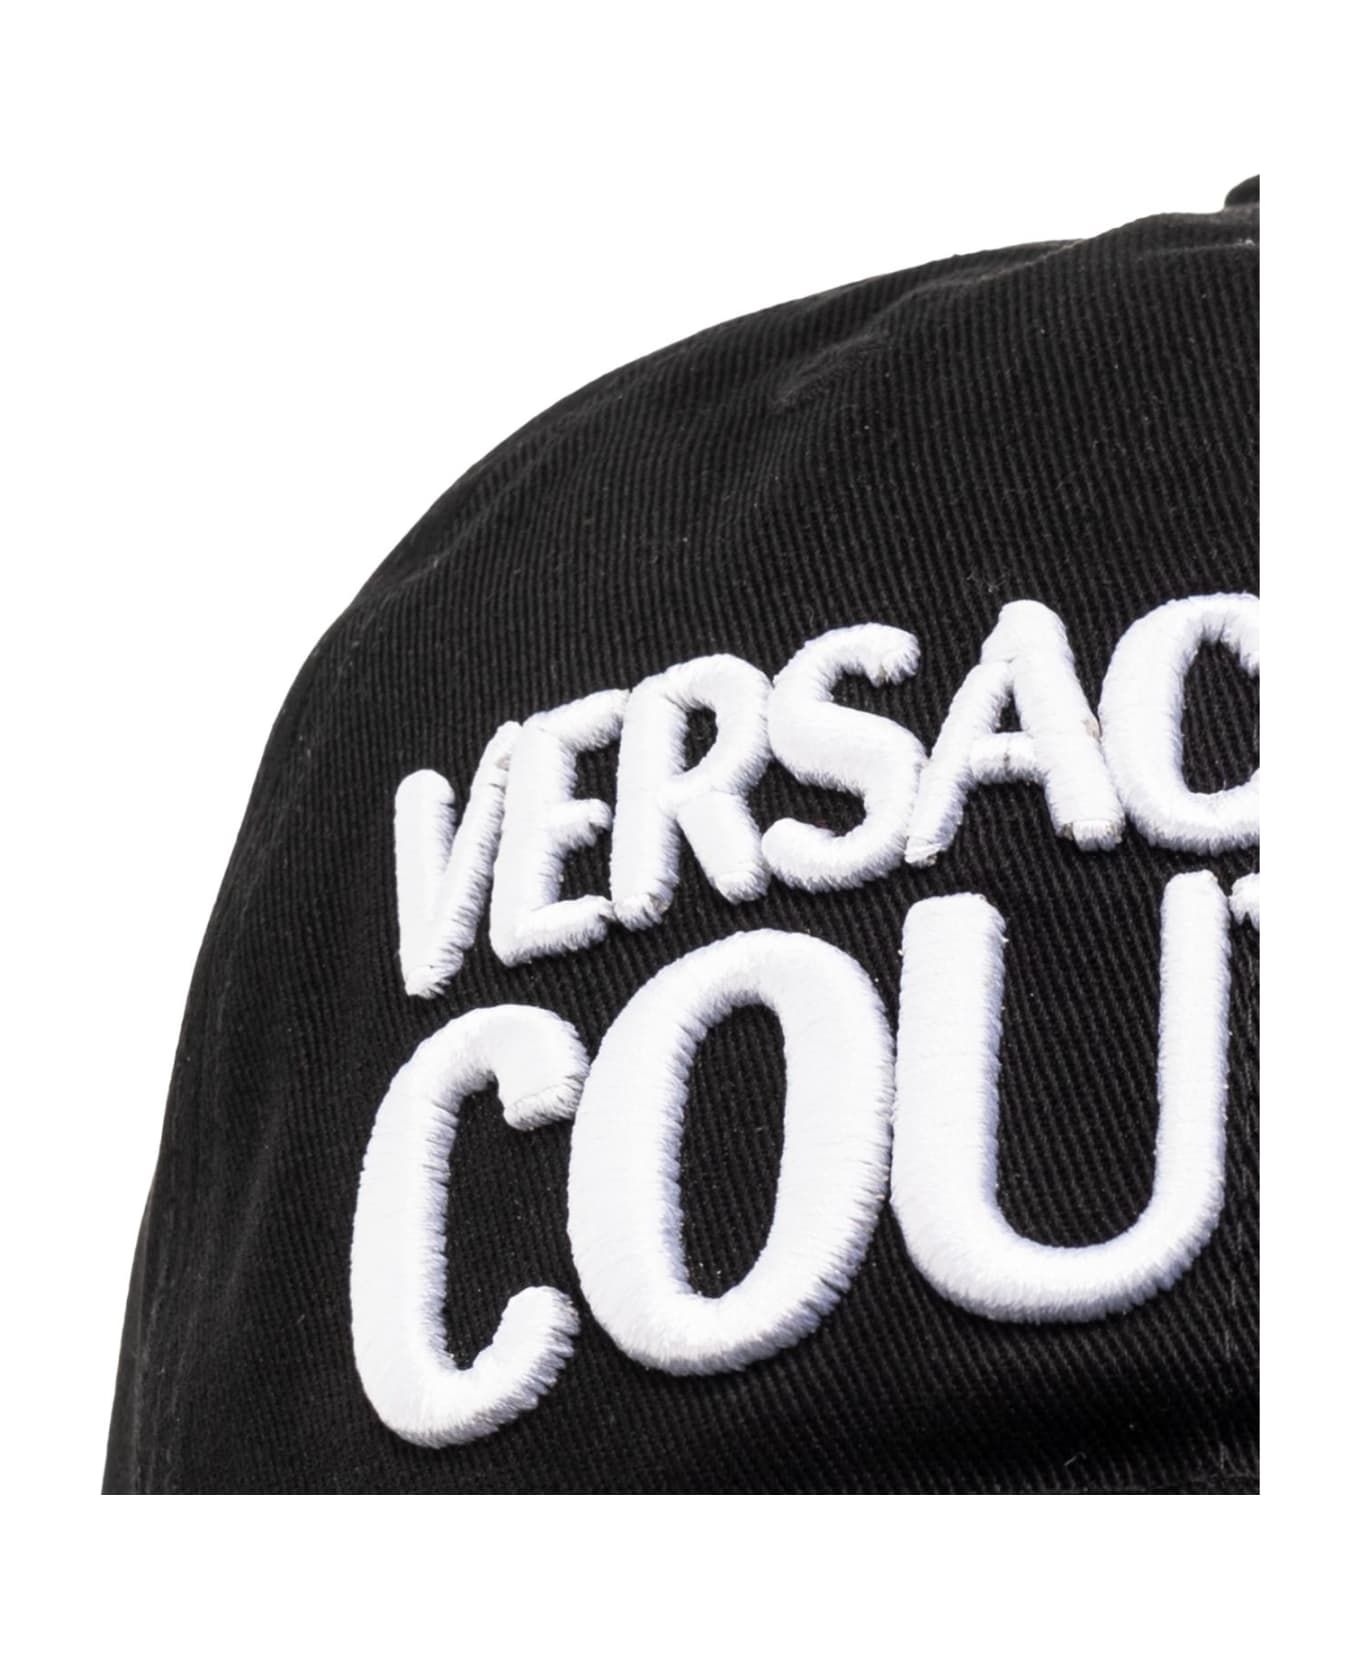 Versace Jeans Couture Baseball Cap With Logo - NERO 帽子